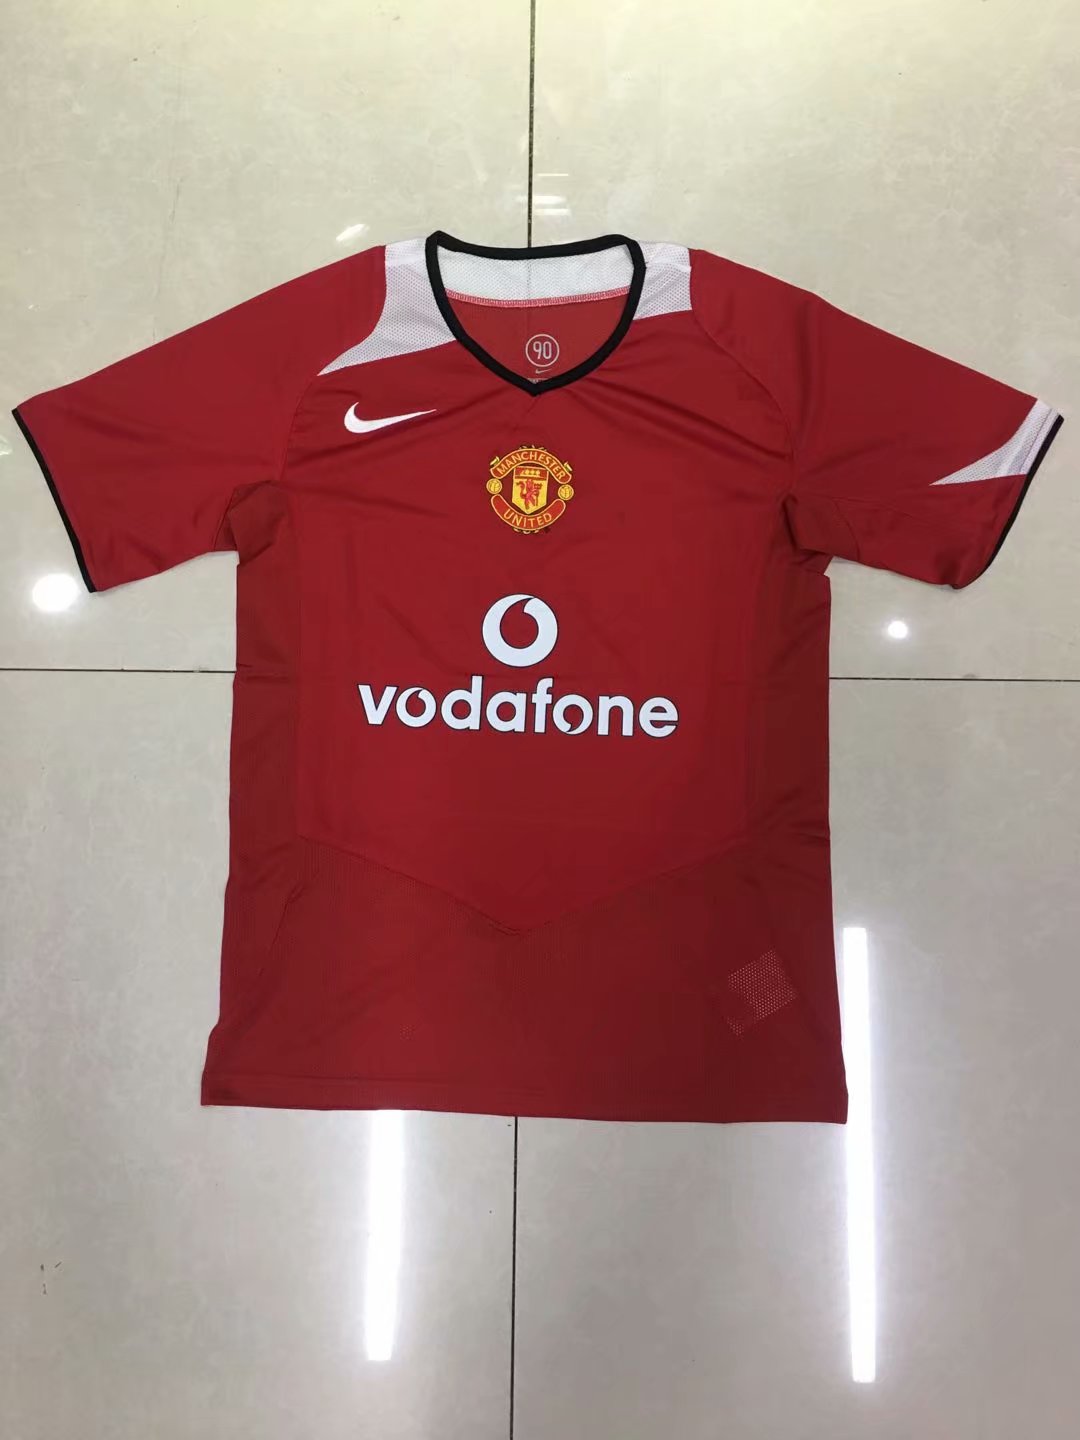 2005-2006 Manchester United home